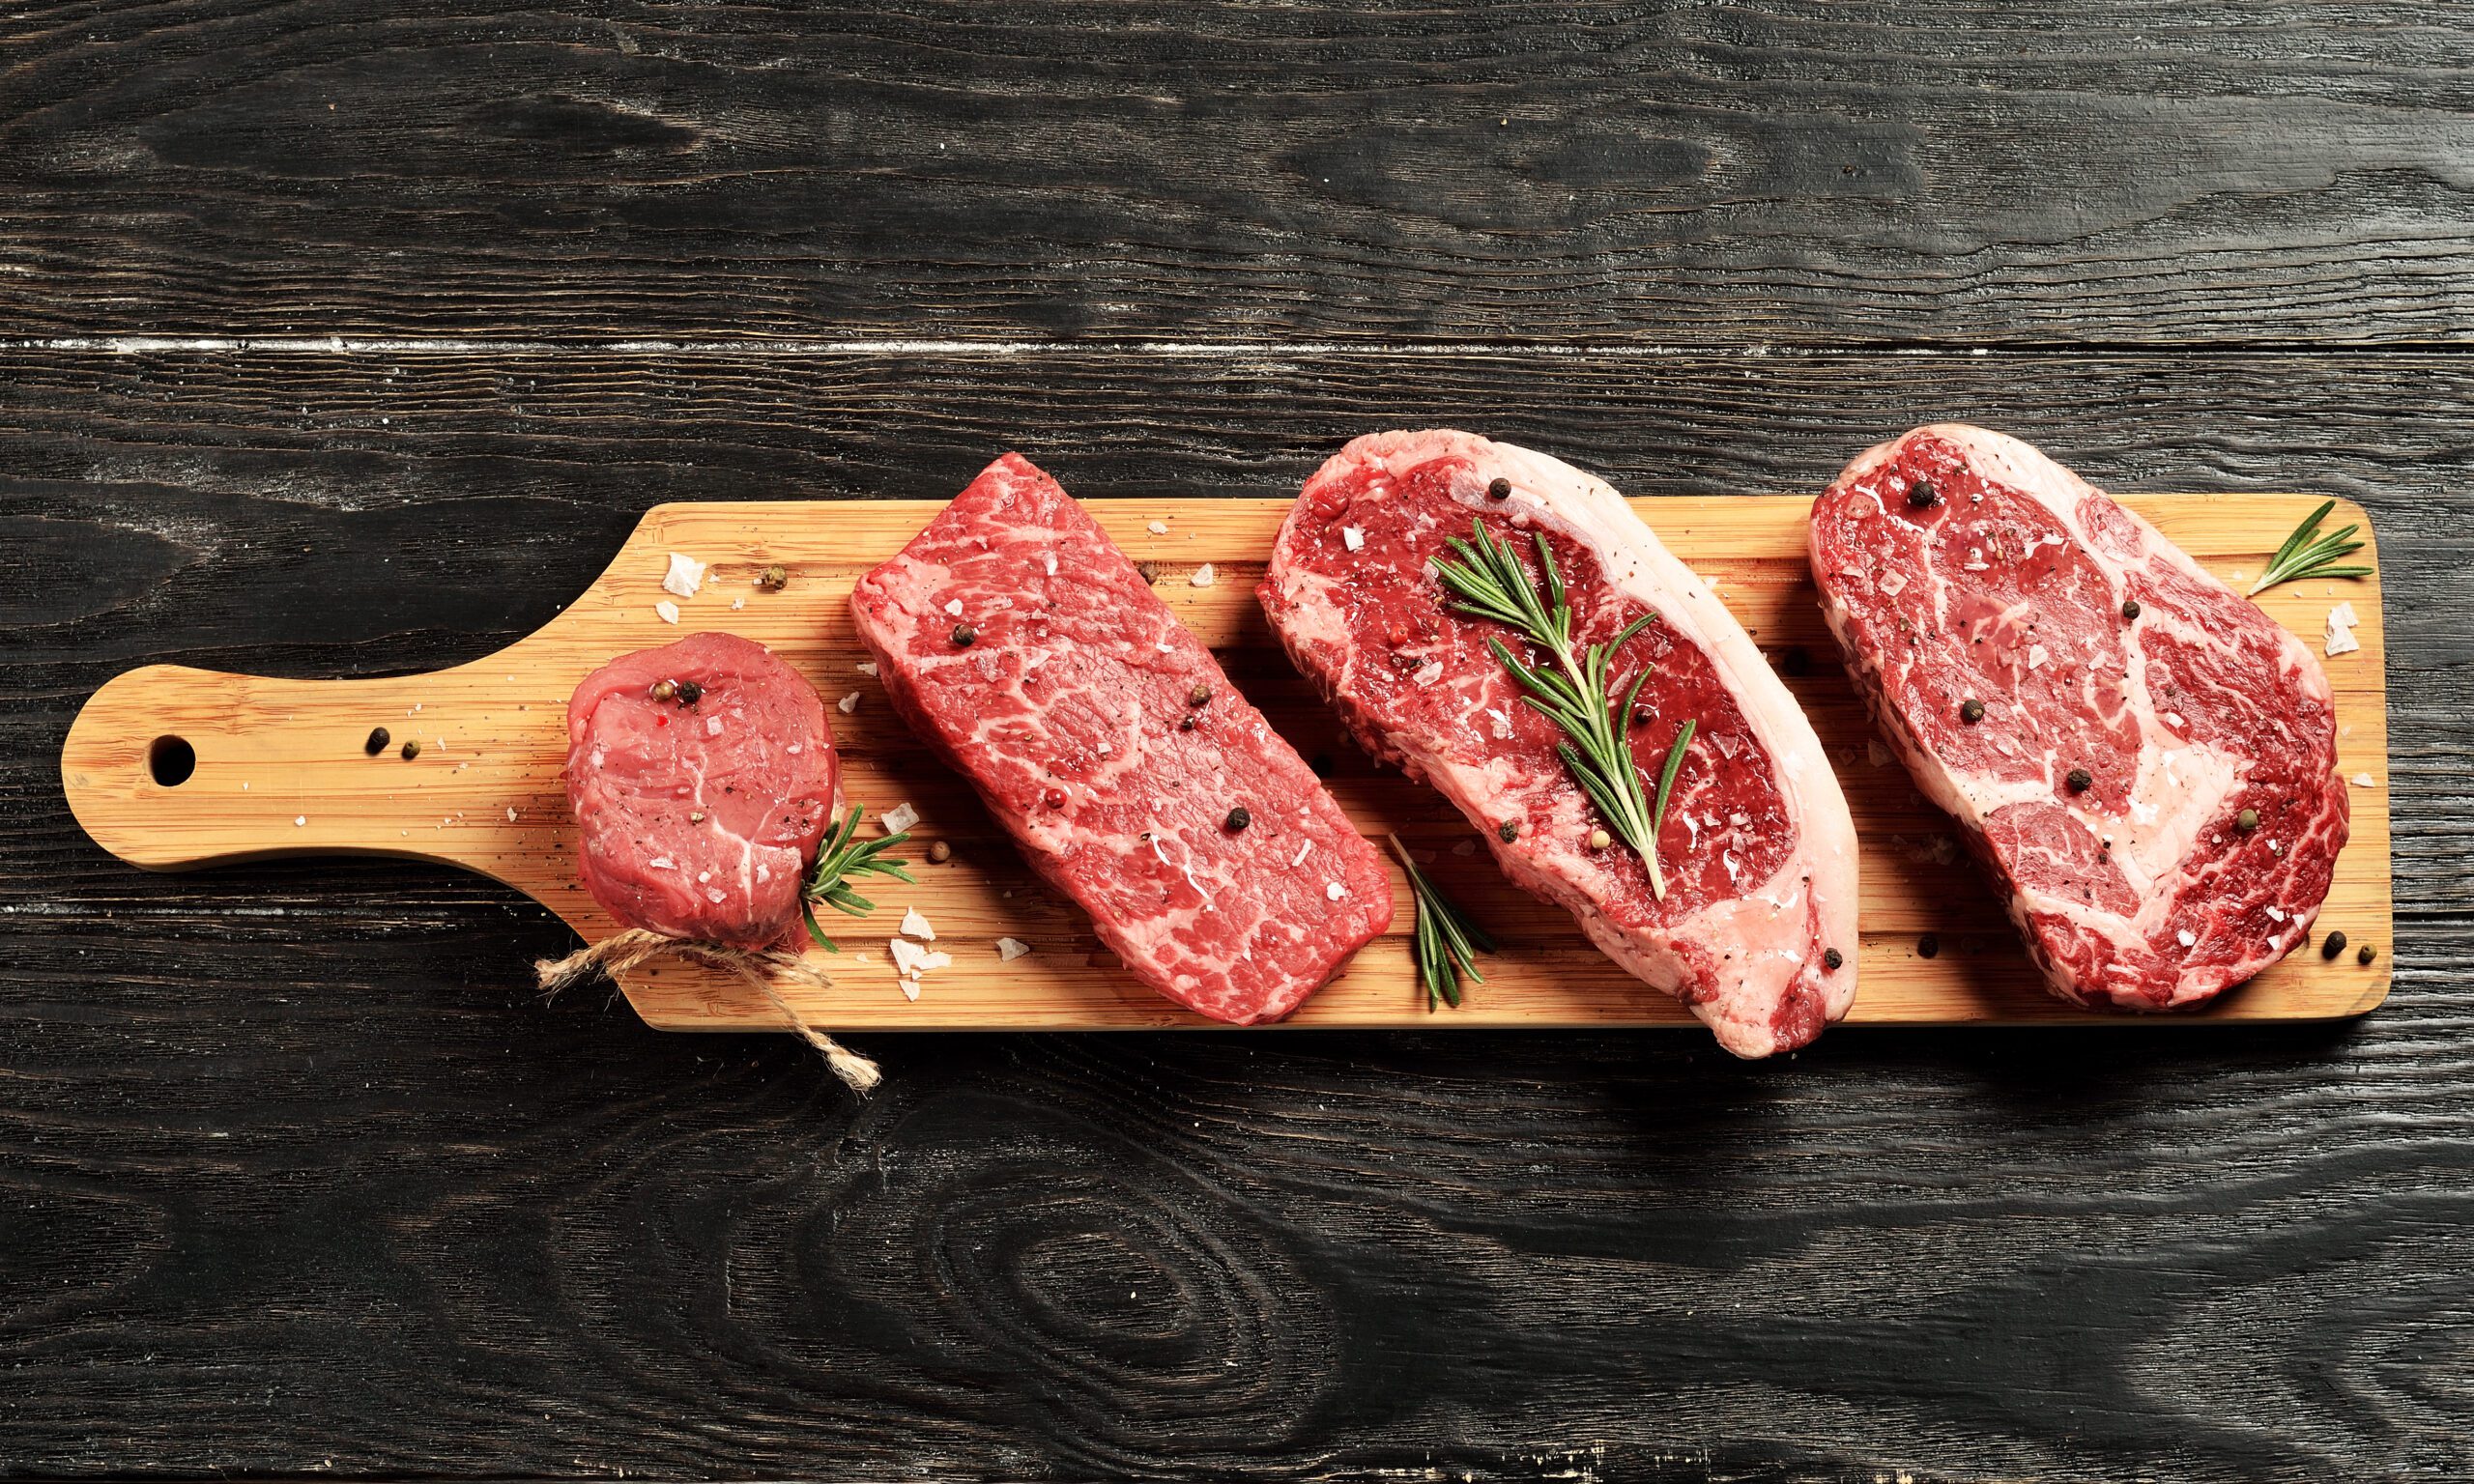 How To Tell If Your Steak Has Gone Bad